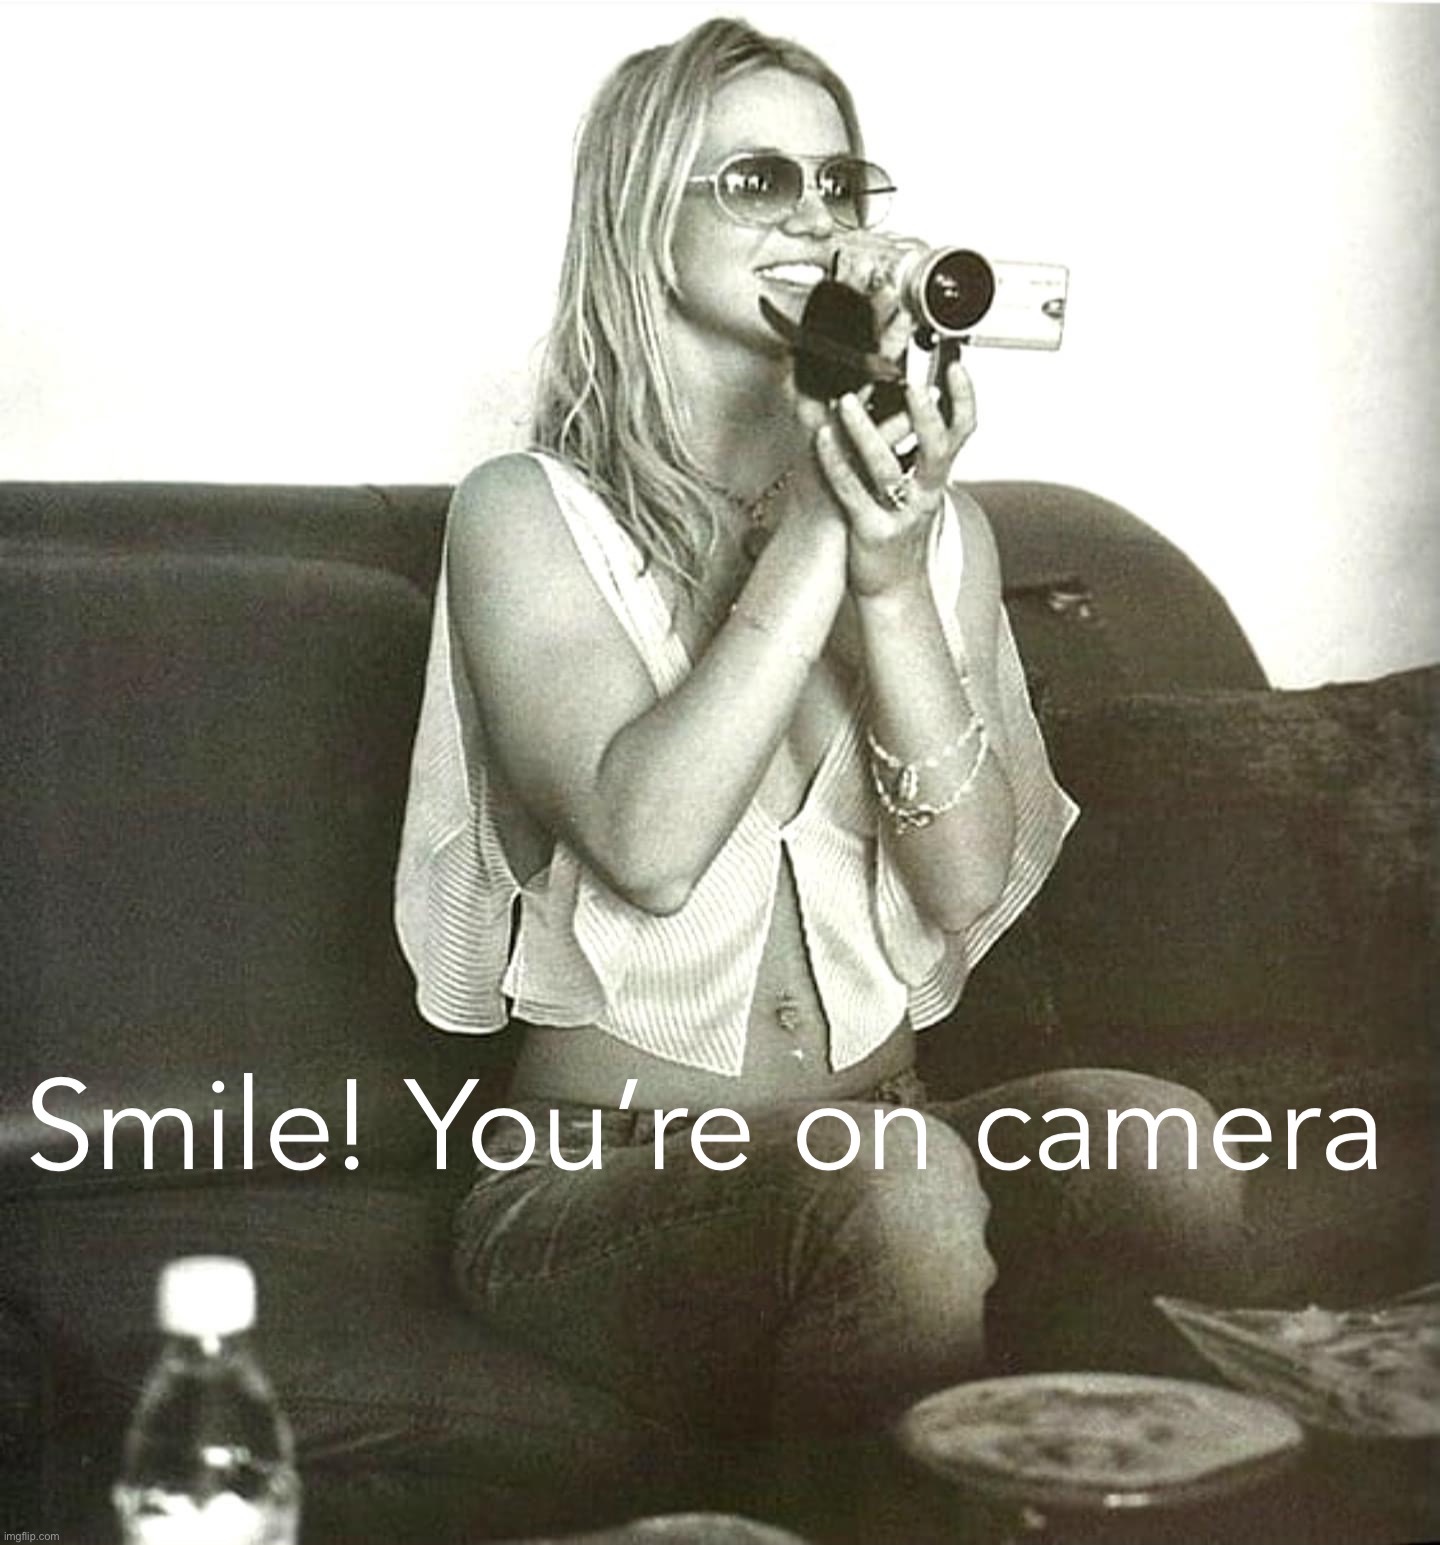 Britney Spears smile you’re on camera | image tagged in britney spears smile you re on camera,camera,britney spears,video camera,snap,cringe | made w/ Imgflip meme maker